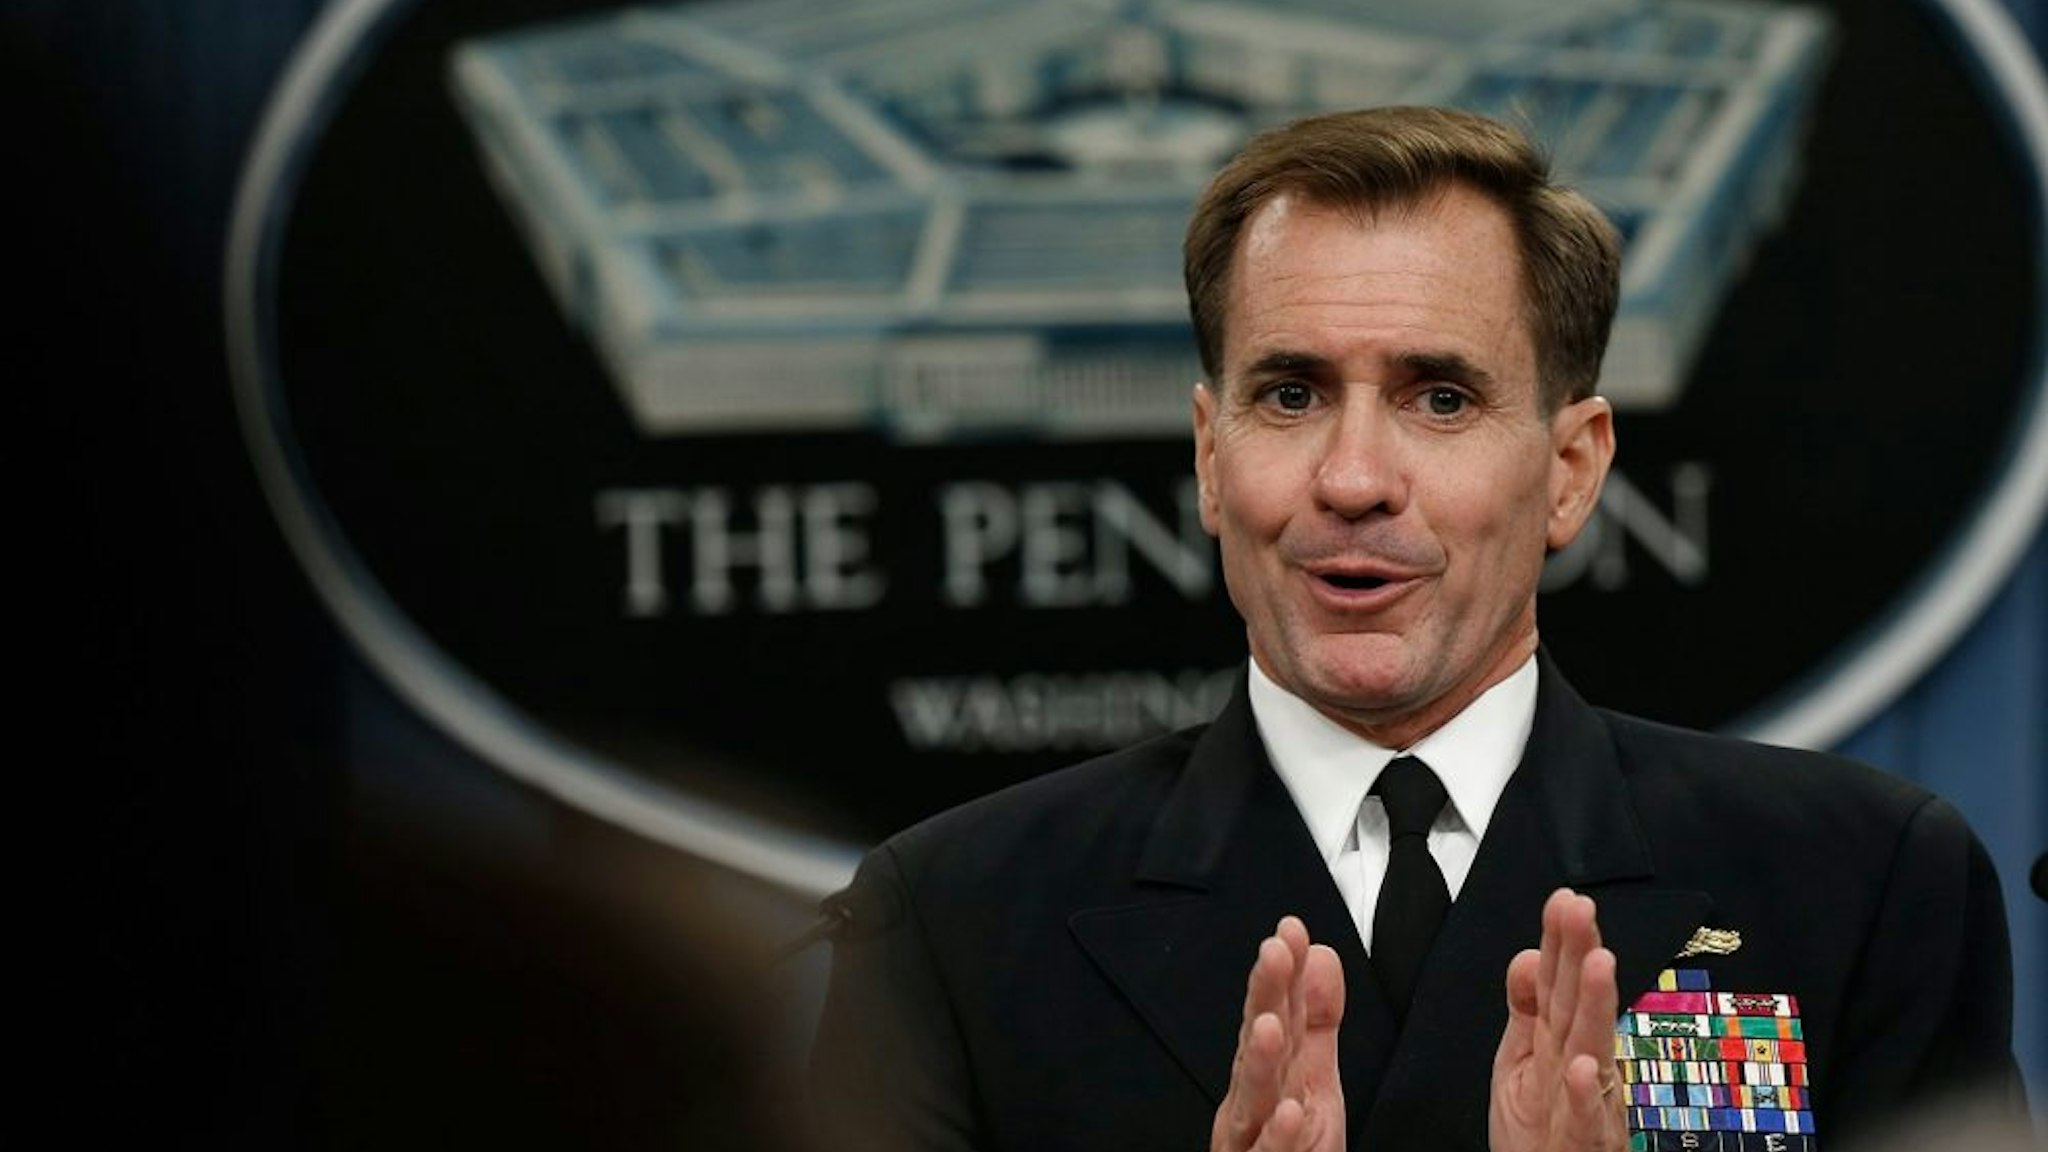 ARLINGTON, VA - SEPTEMBER 02: Pentagon Press Secretary Rear Adm. John Kirby answers questions at the Pentagon September 2, 2014 in Arlington, Virginia. Kirby commented on the current situation in Iraq, Ukraine, and a recent operation by U.S. forces in Somalia.